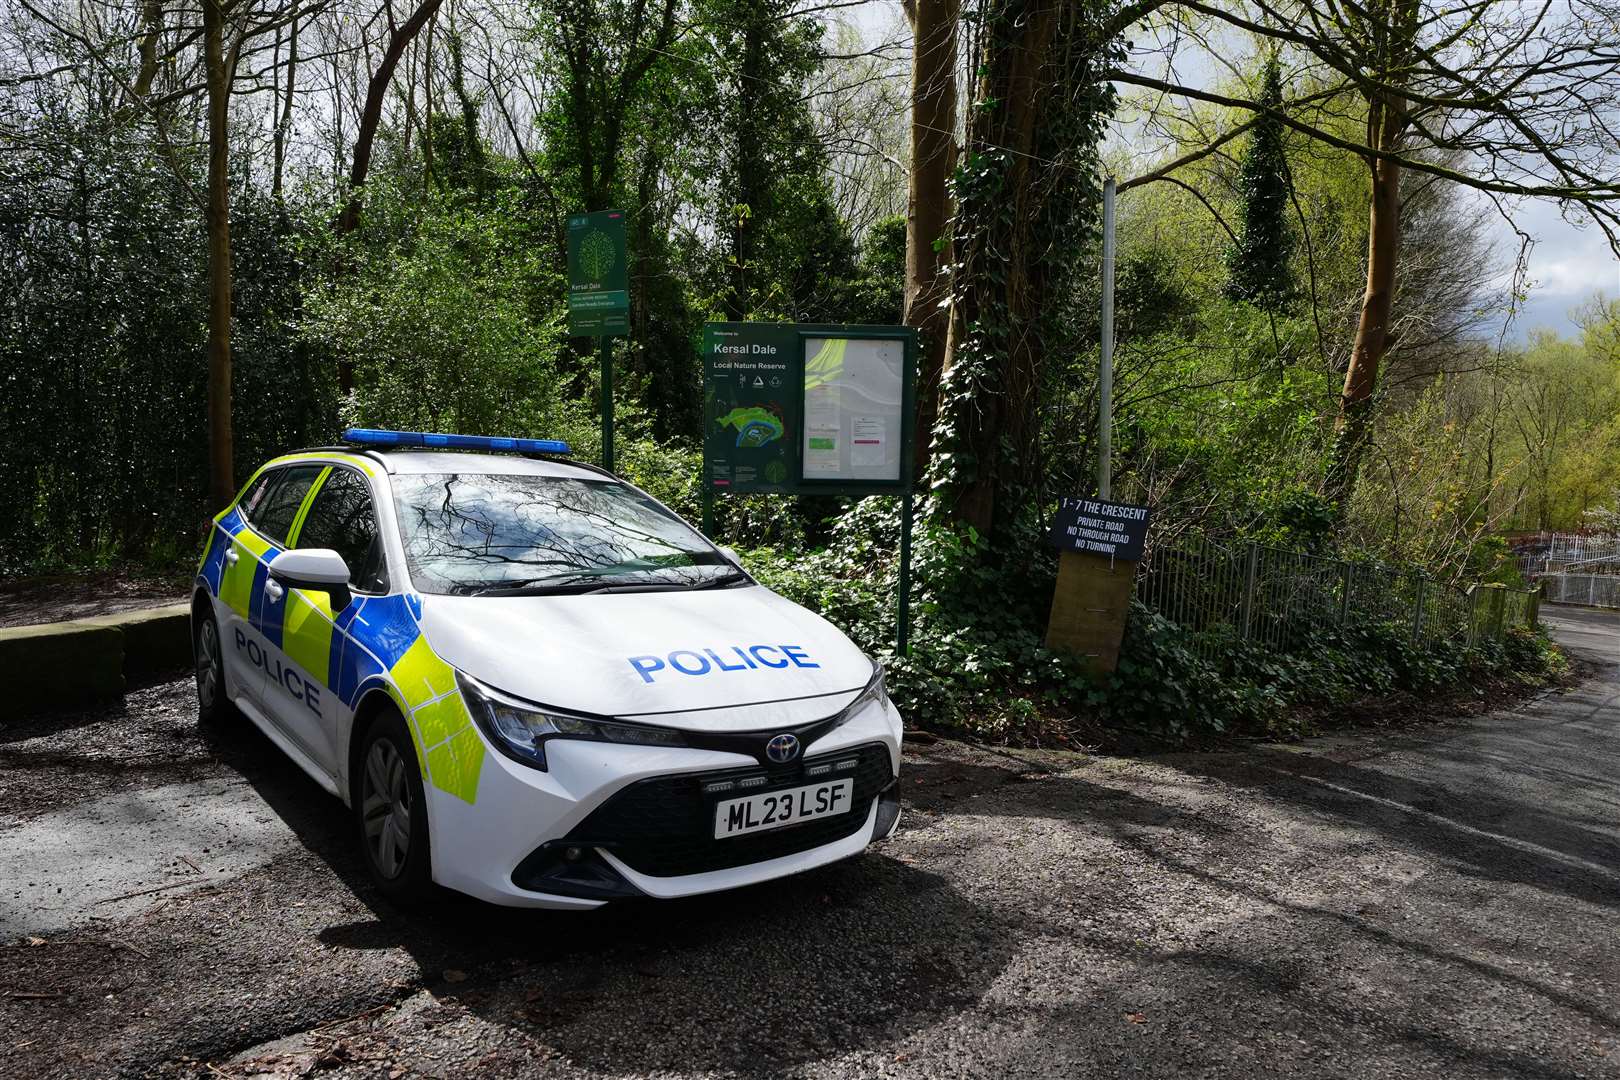 A police car parked at the entrance to Kersal Dale, near Salford, Greater Manchester (Peter Byrne/PA)